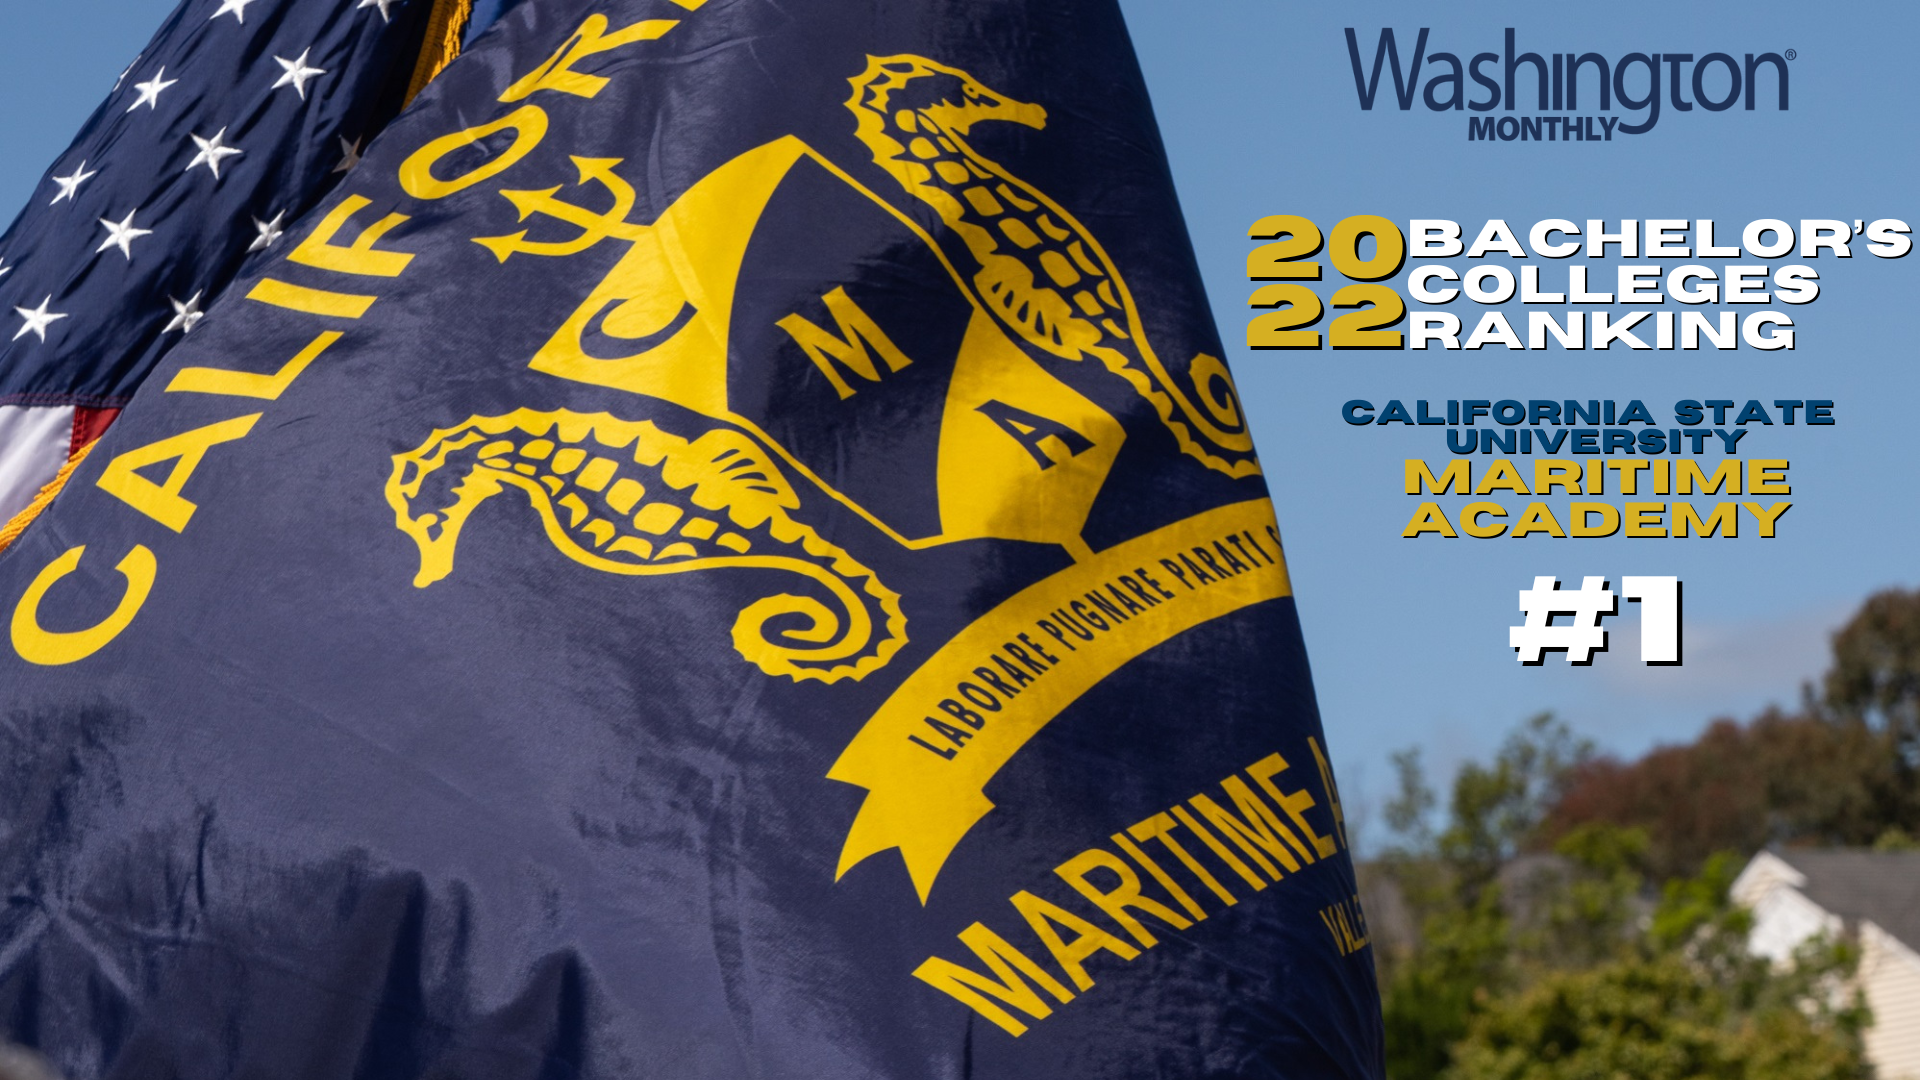 Washington Monthly Ranks Cal Maritime #1 in Bachelor’s Colleges